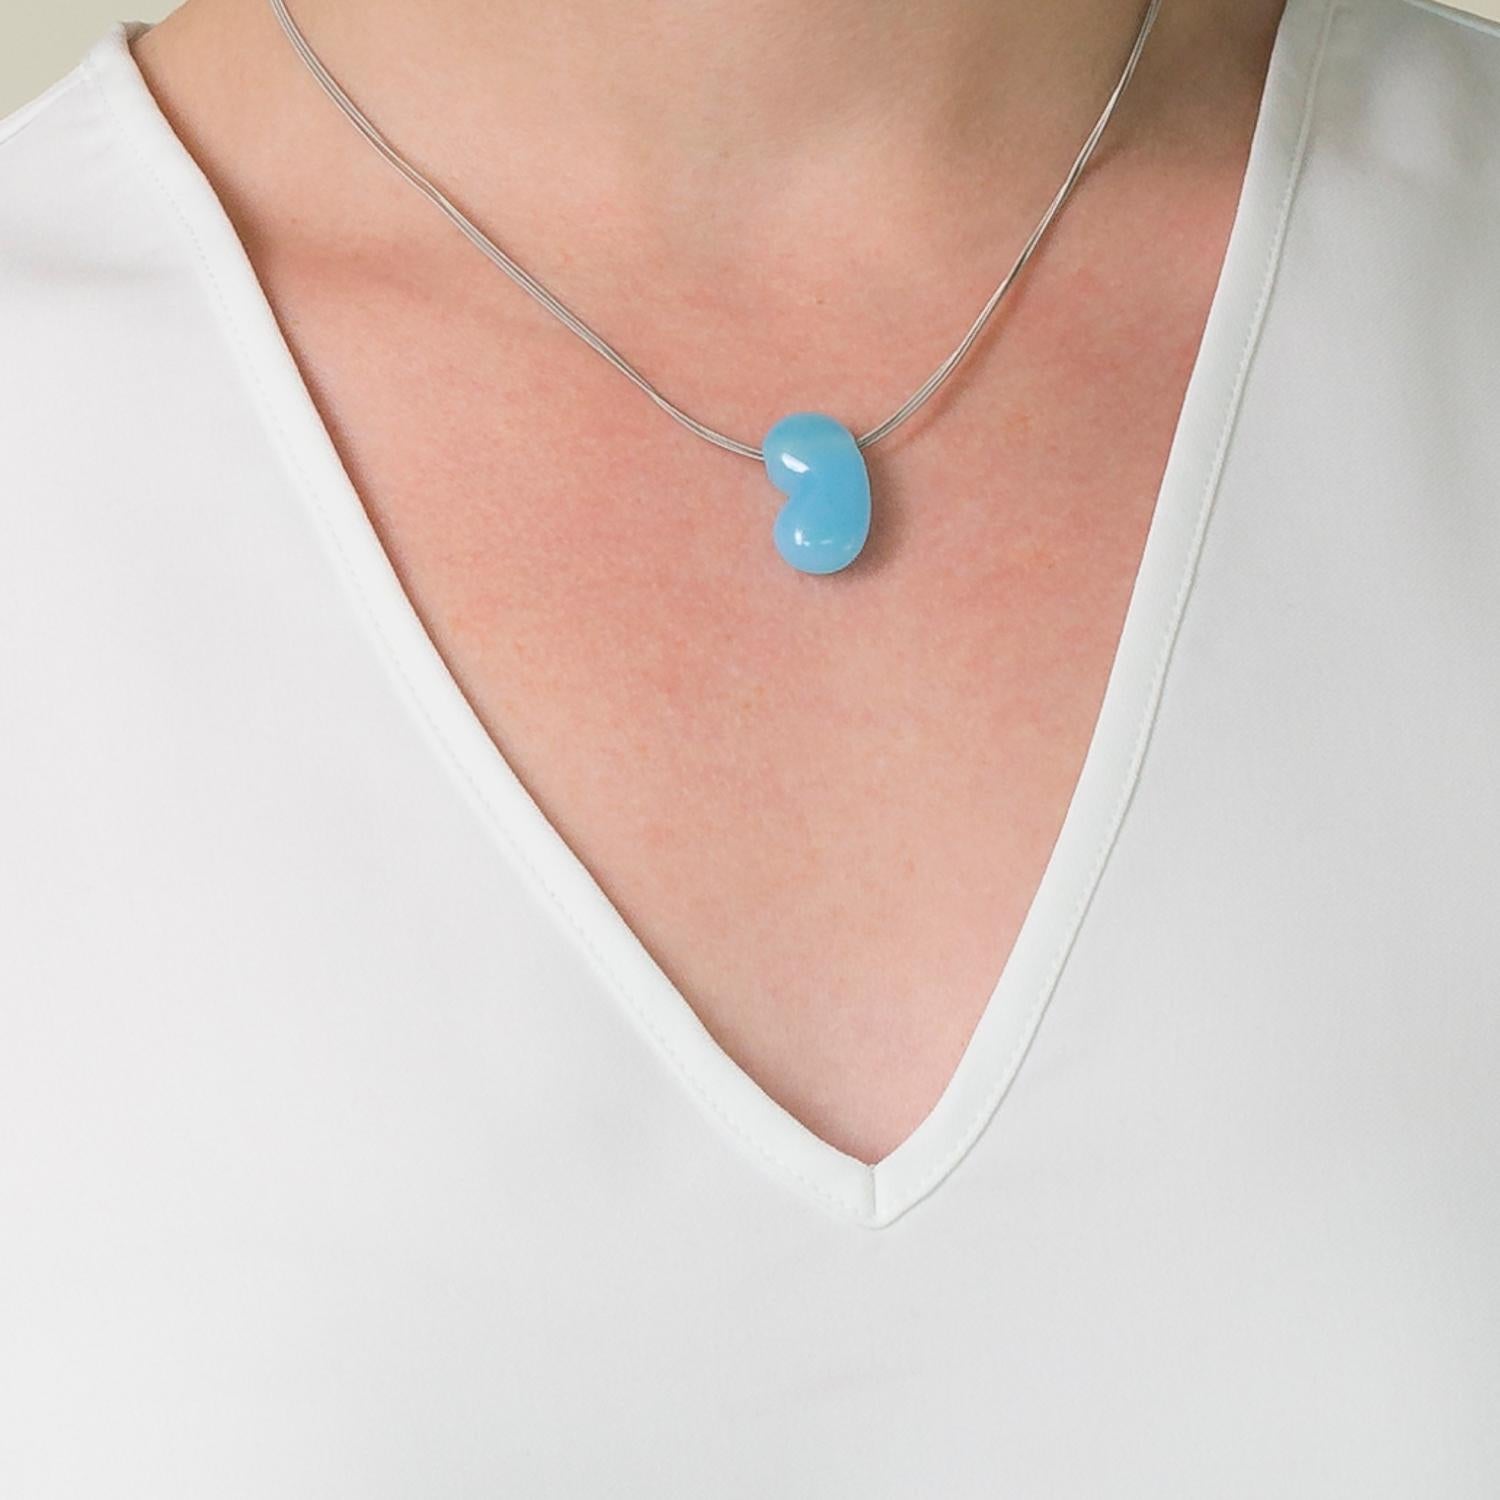 Cabochon Pendant Necklace, 18 Karat White Gold with Turquoise Agate Jellybean Pendant For Sale